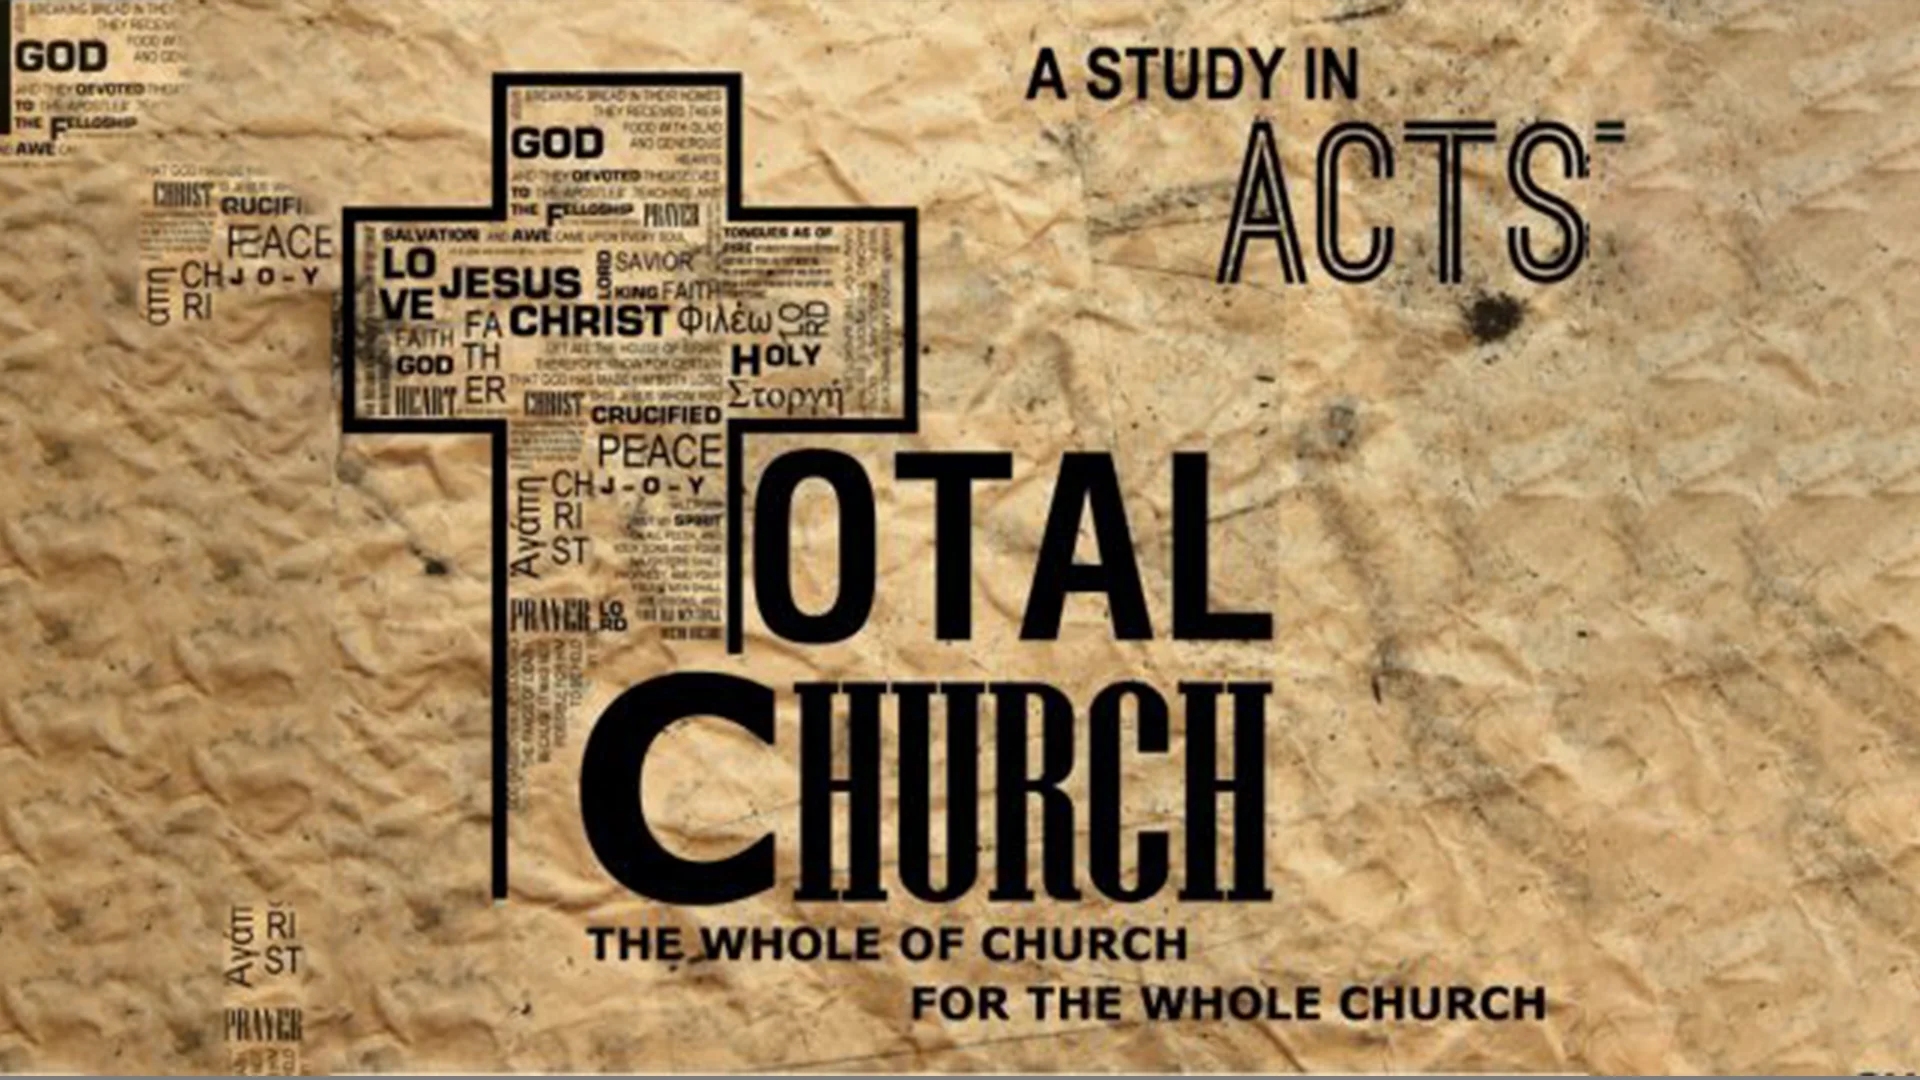 Acts: The Whole of Church for the Whole Church